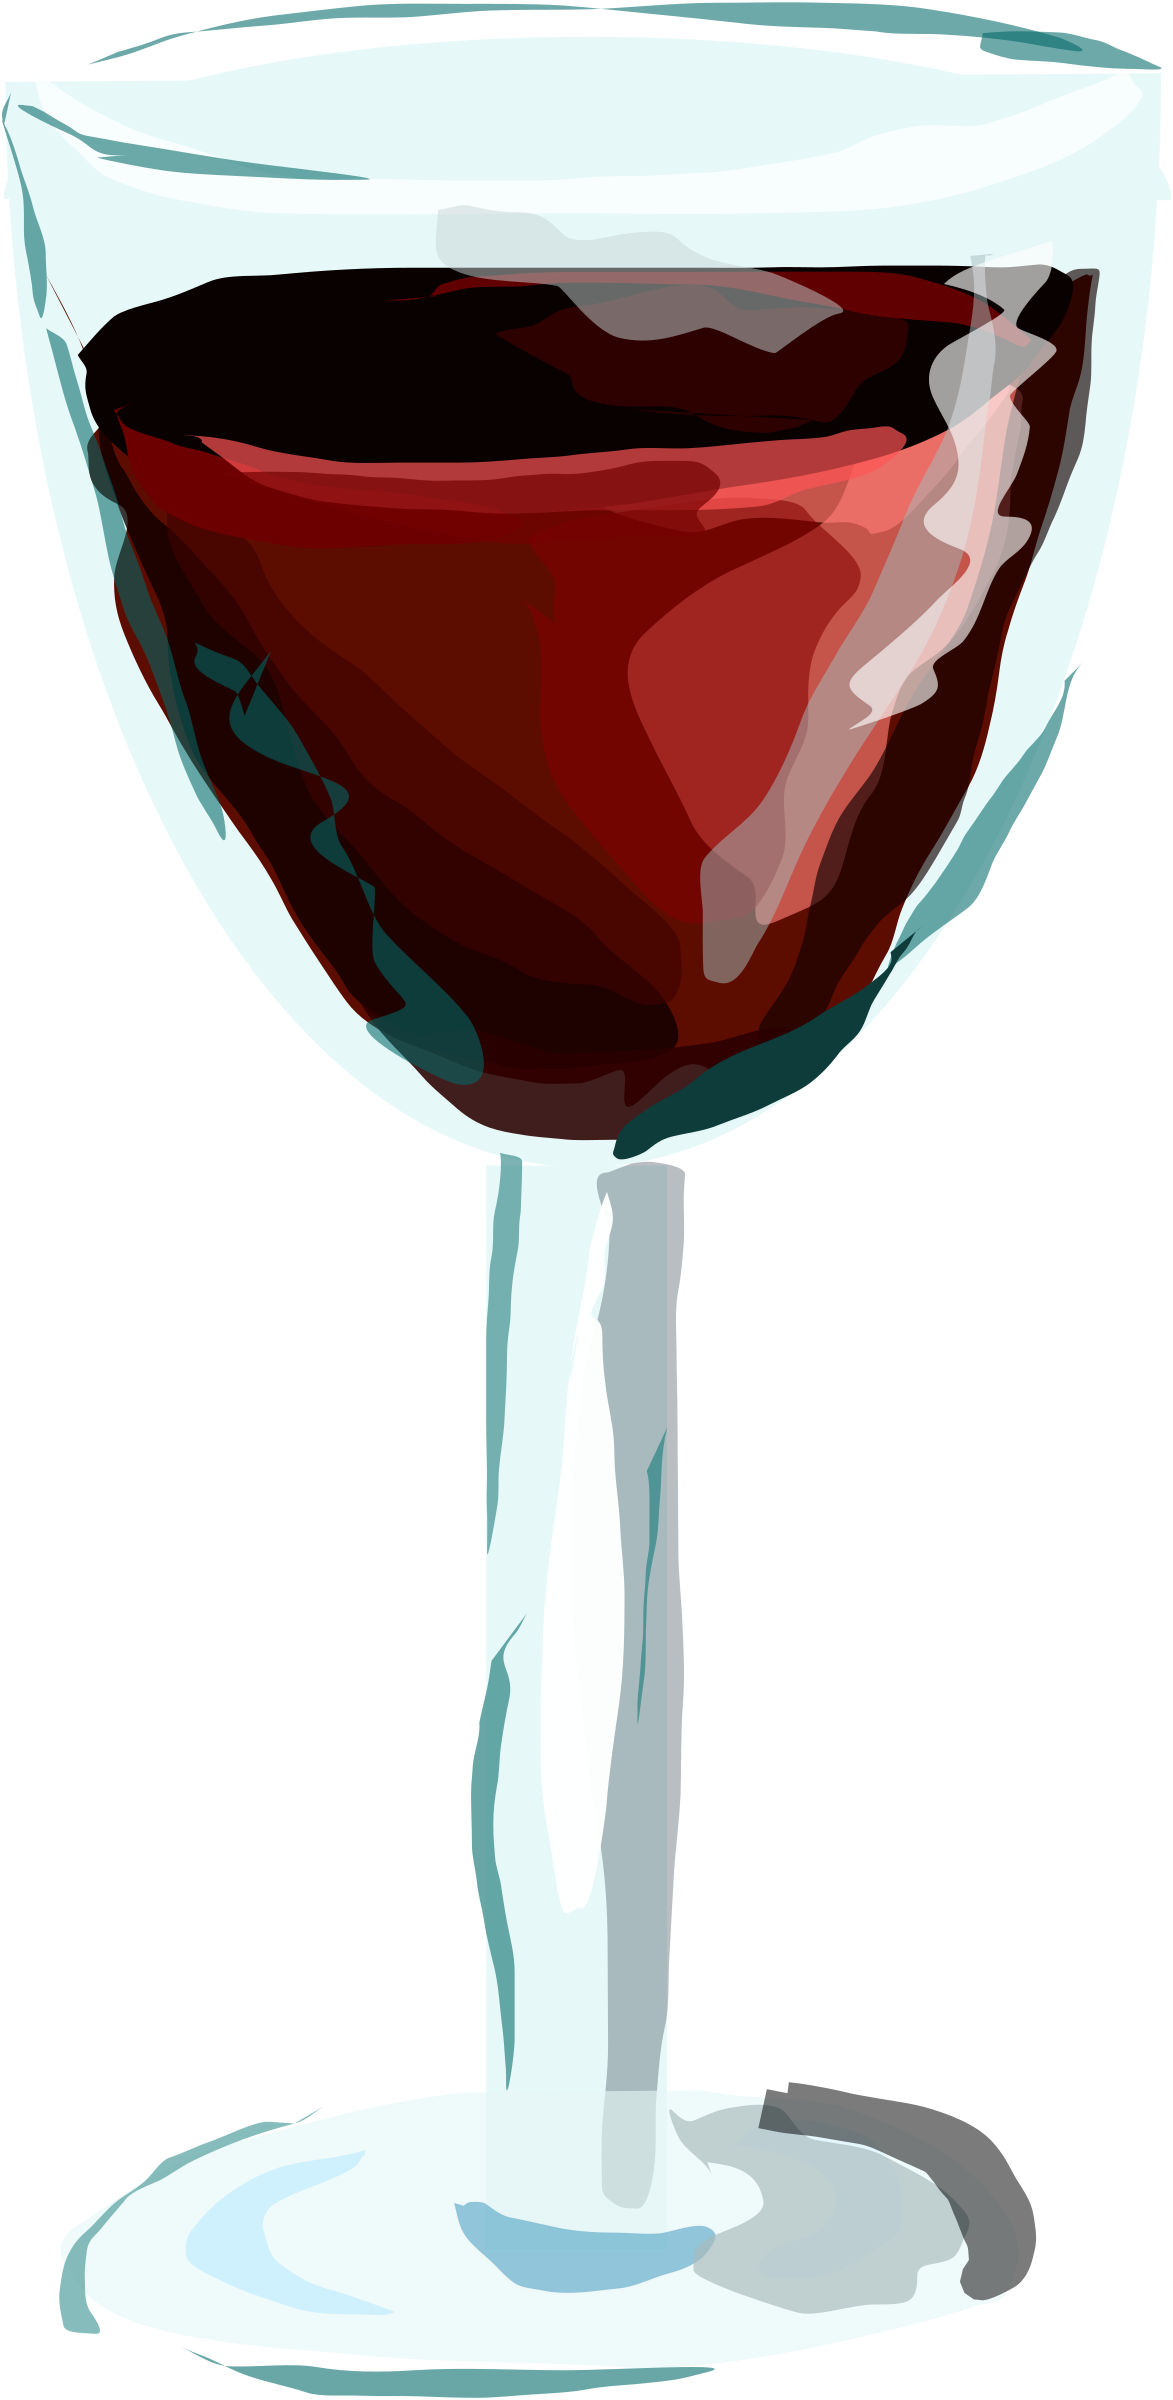 Glass of wine drawing free image download